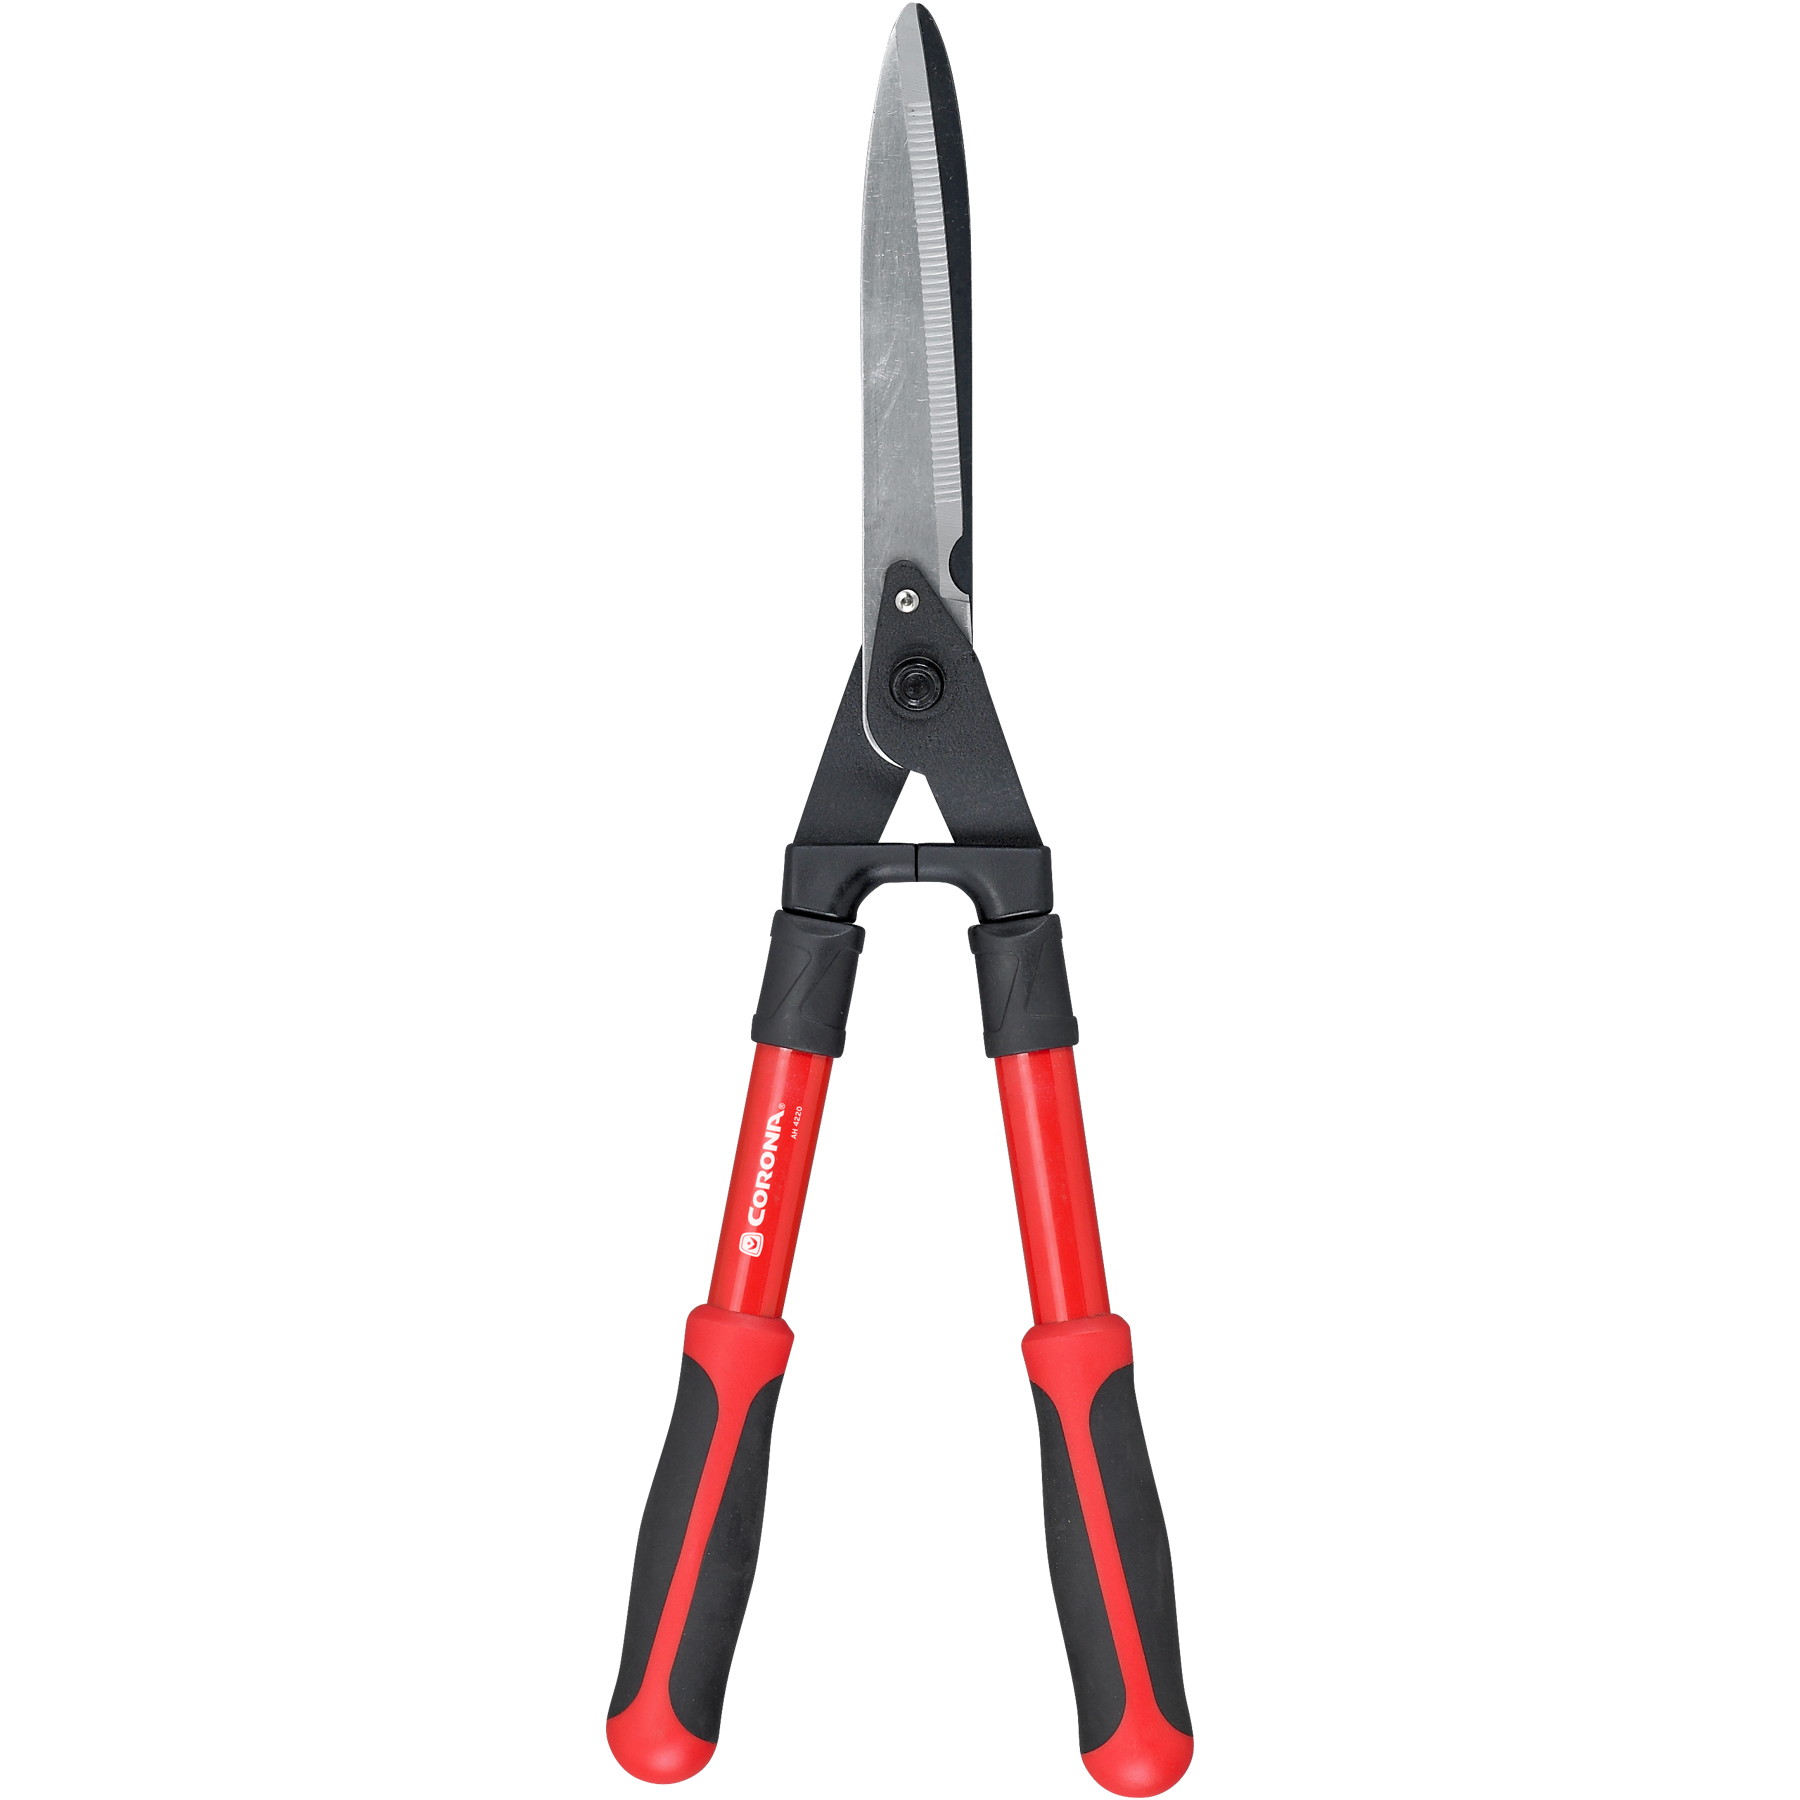 Corona Compound Action Hedge Shears - 9 Inch - image 2 of 2